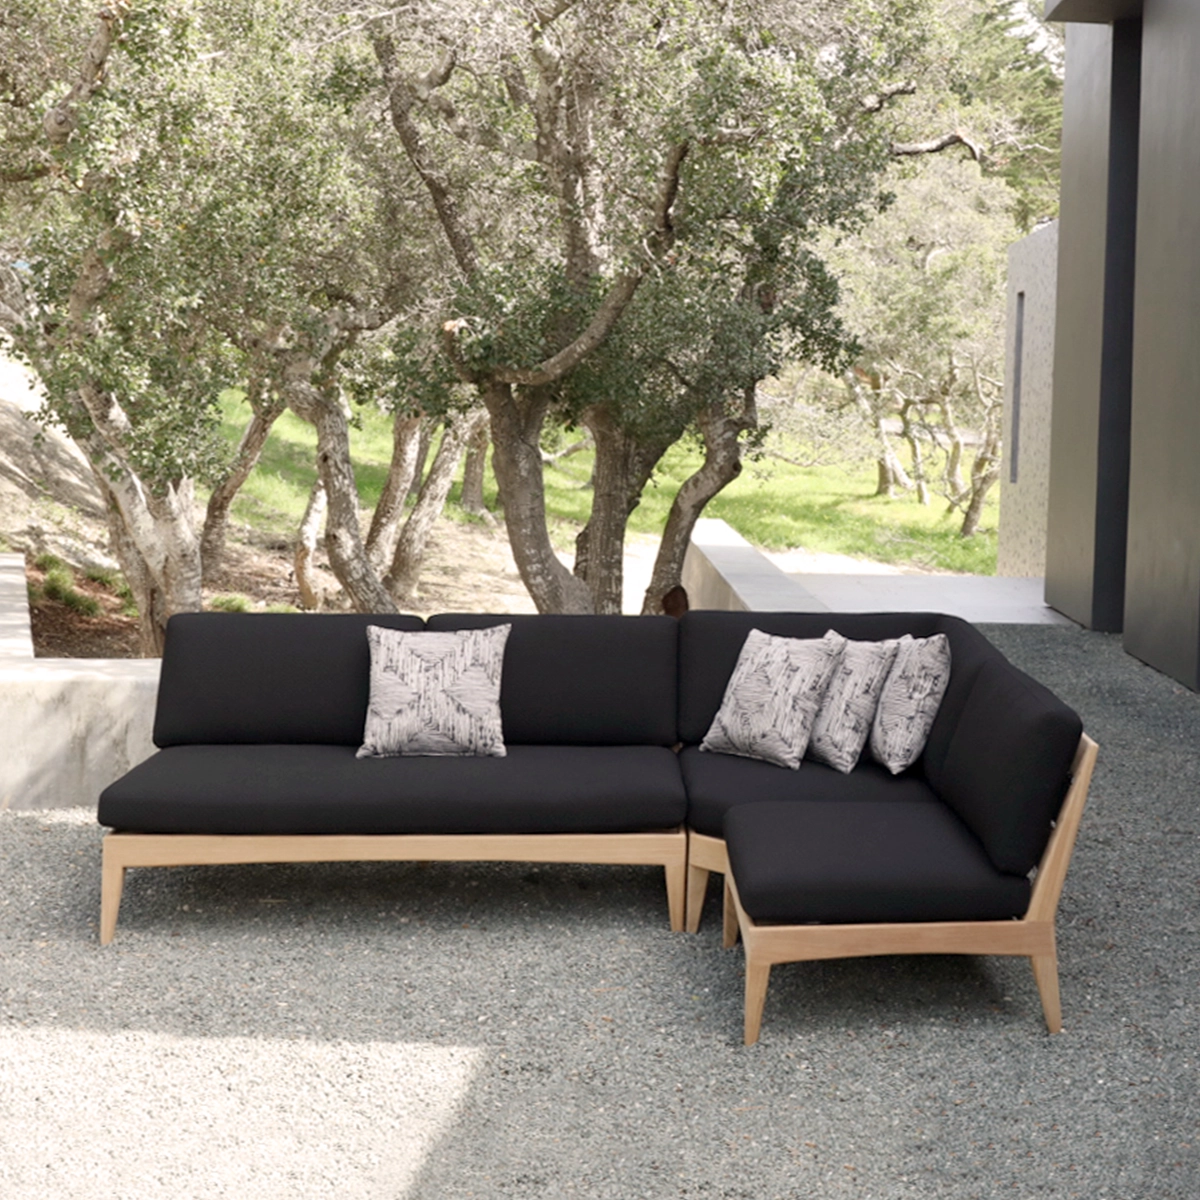 Cover image for the Sofas Product Type